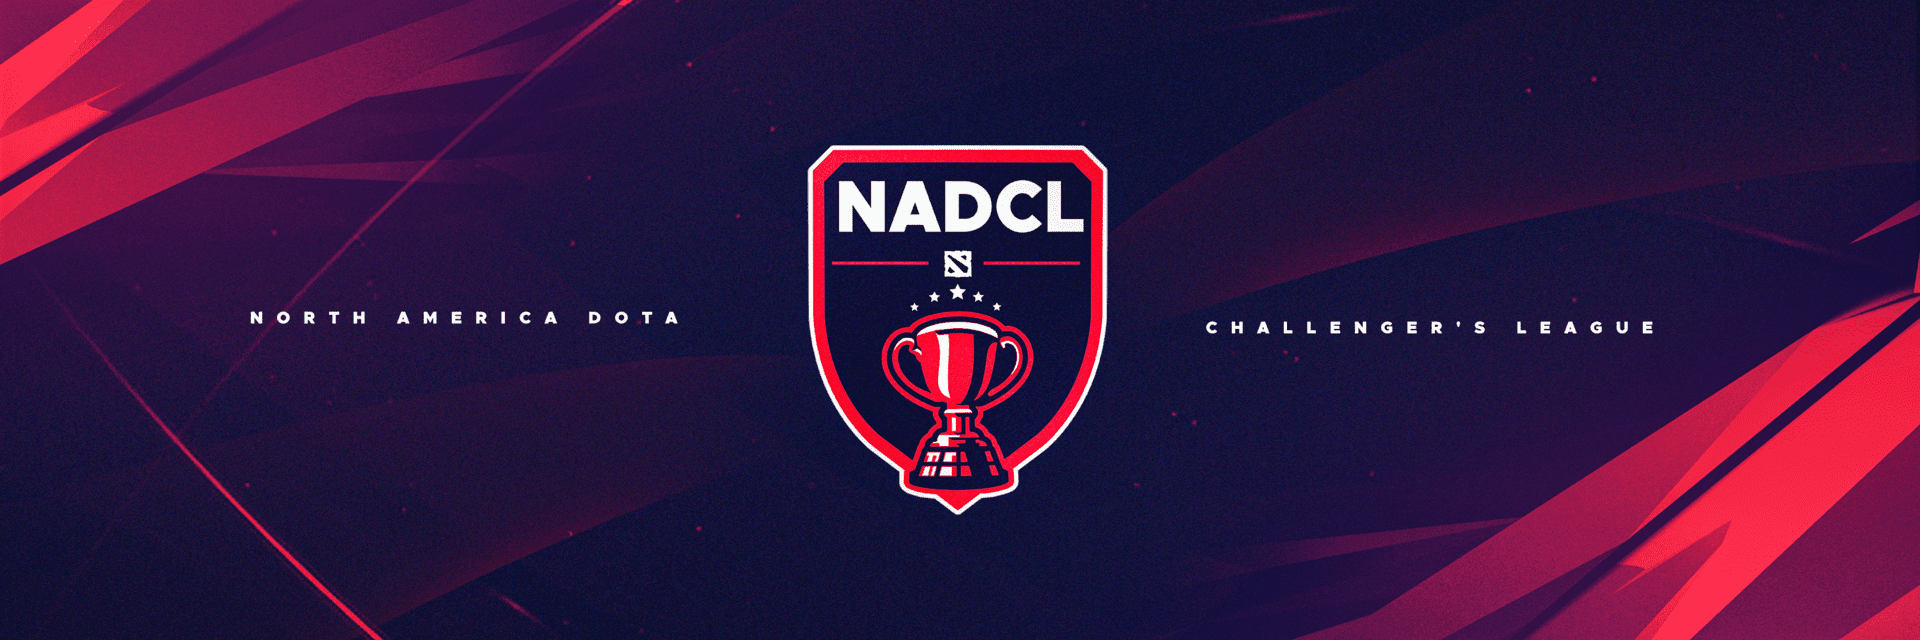 Banner logo for NADCL